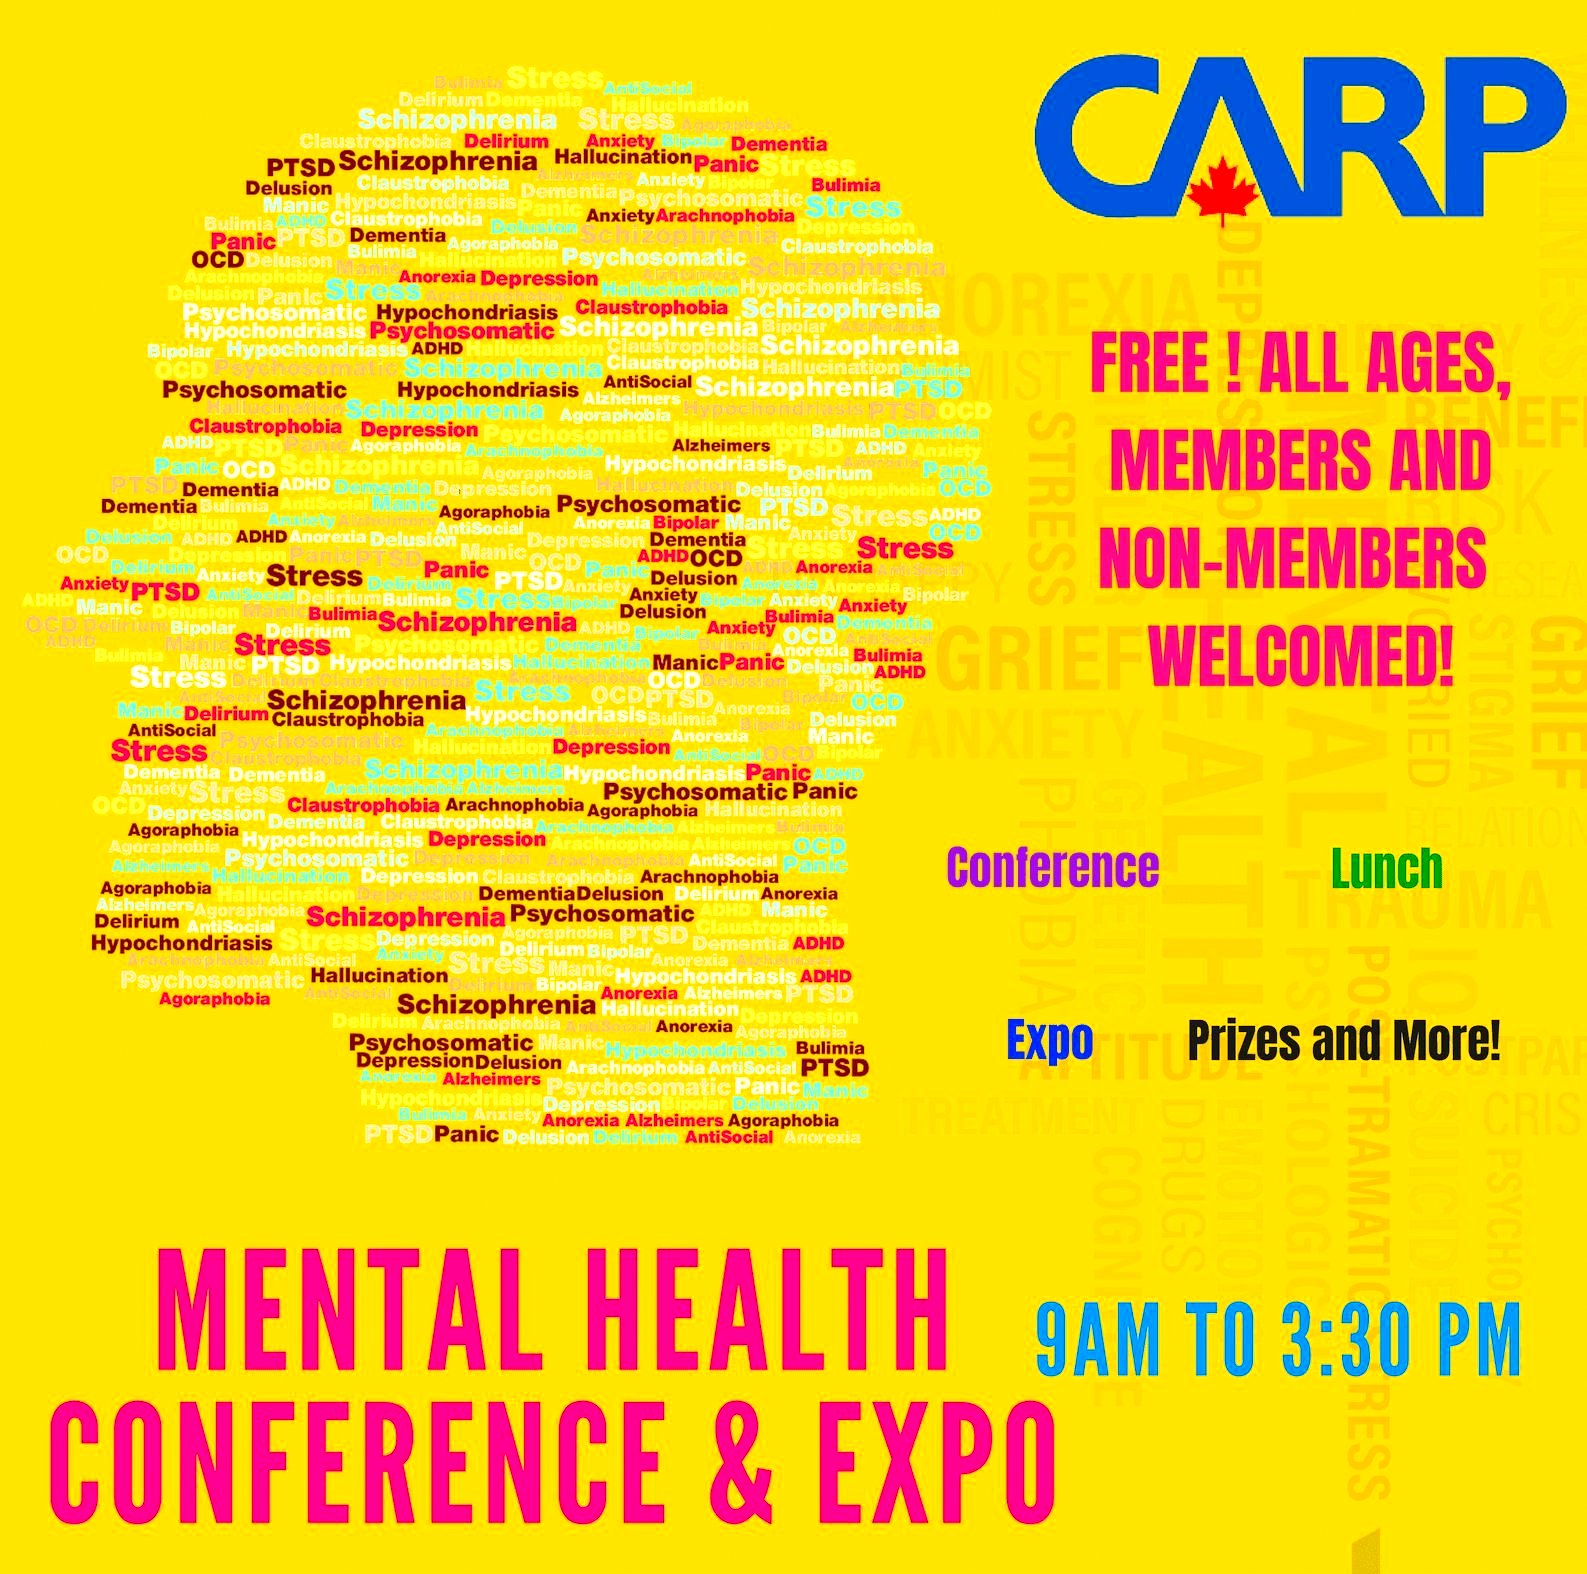 Google image from https://www.eventbrite.com/e/free-mental-health-conference-expo-tickets-59335591351